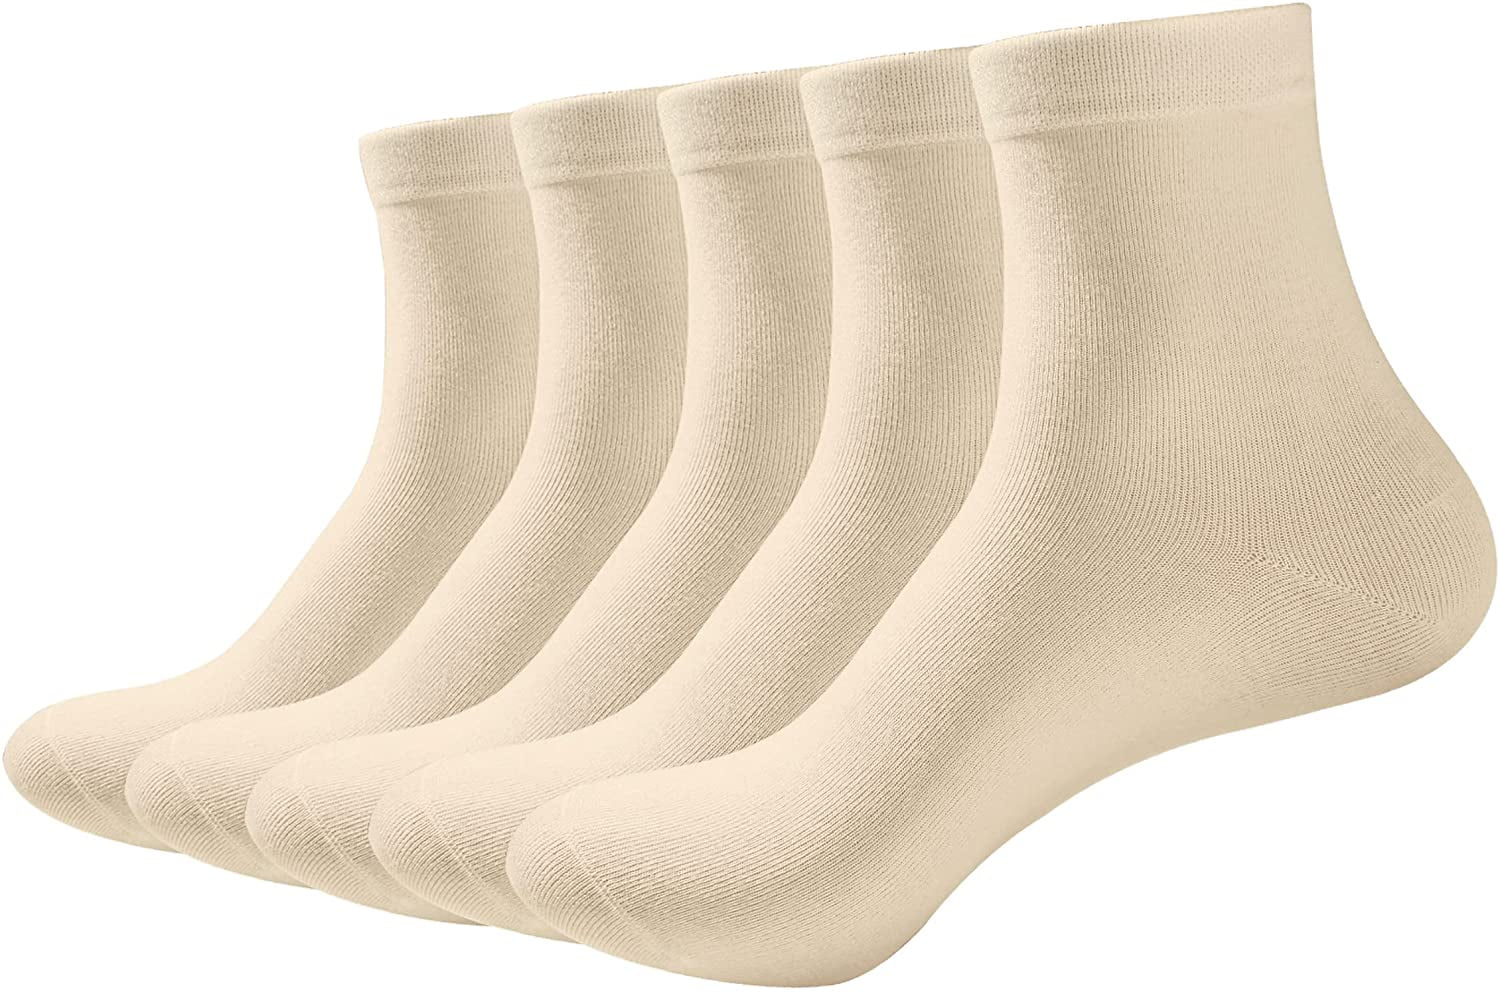 SOX TOWN Super Soft Comfy Breathable Bamboo Crew Socks for Women Thin Casual Dress 